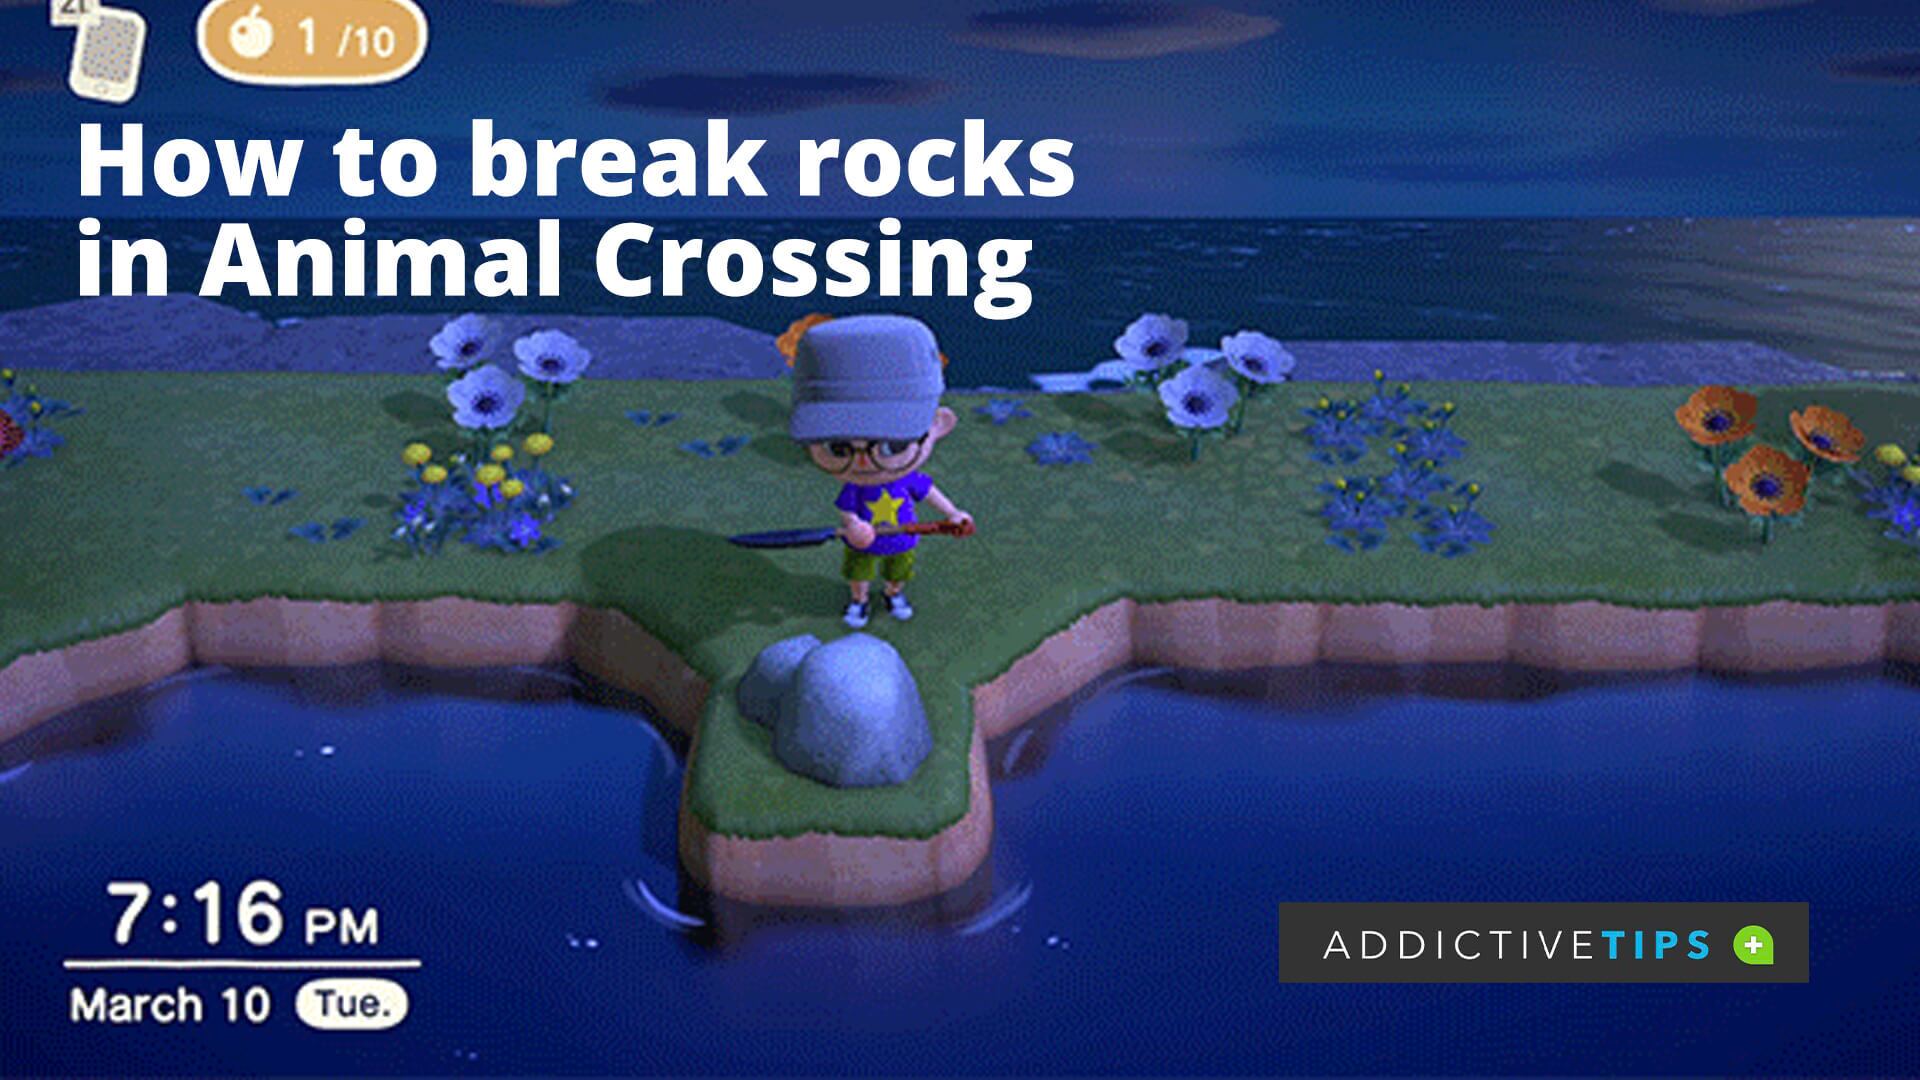 How to Break Rocks in Animal Crossing: Tips and Tricks that Work